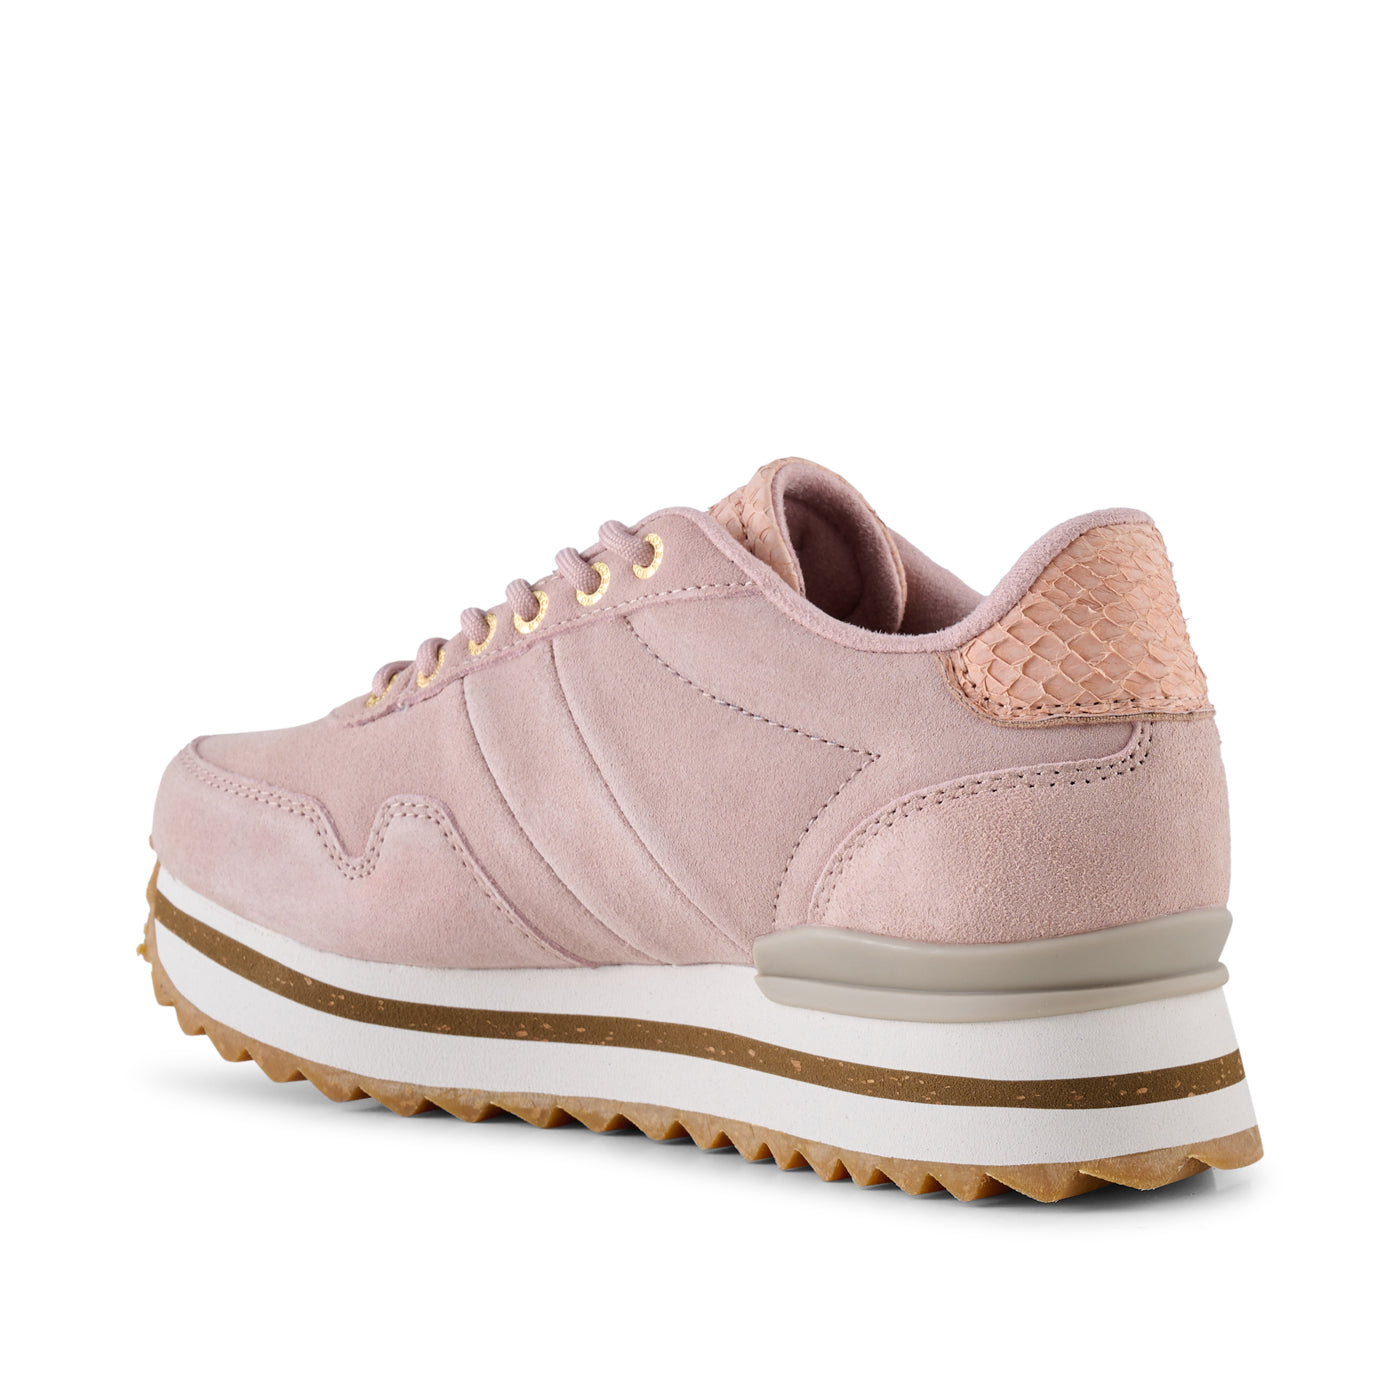 WODEN Nora III Suede Plateau Sneakers 800 Dry Rose